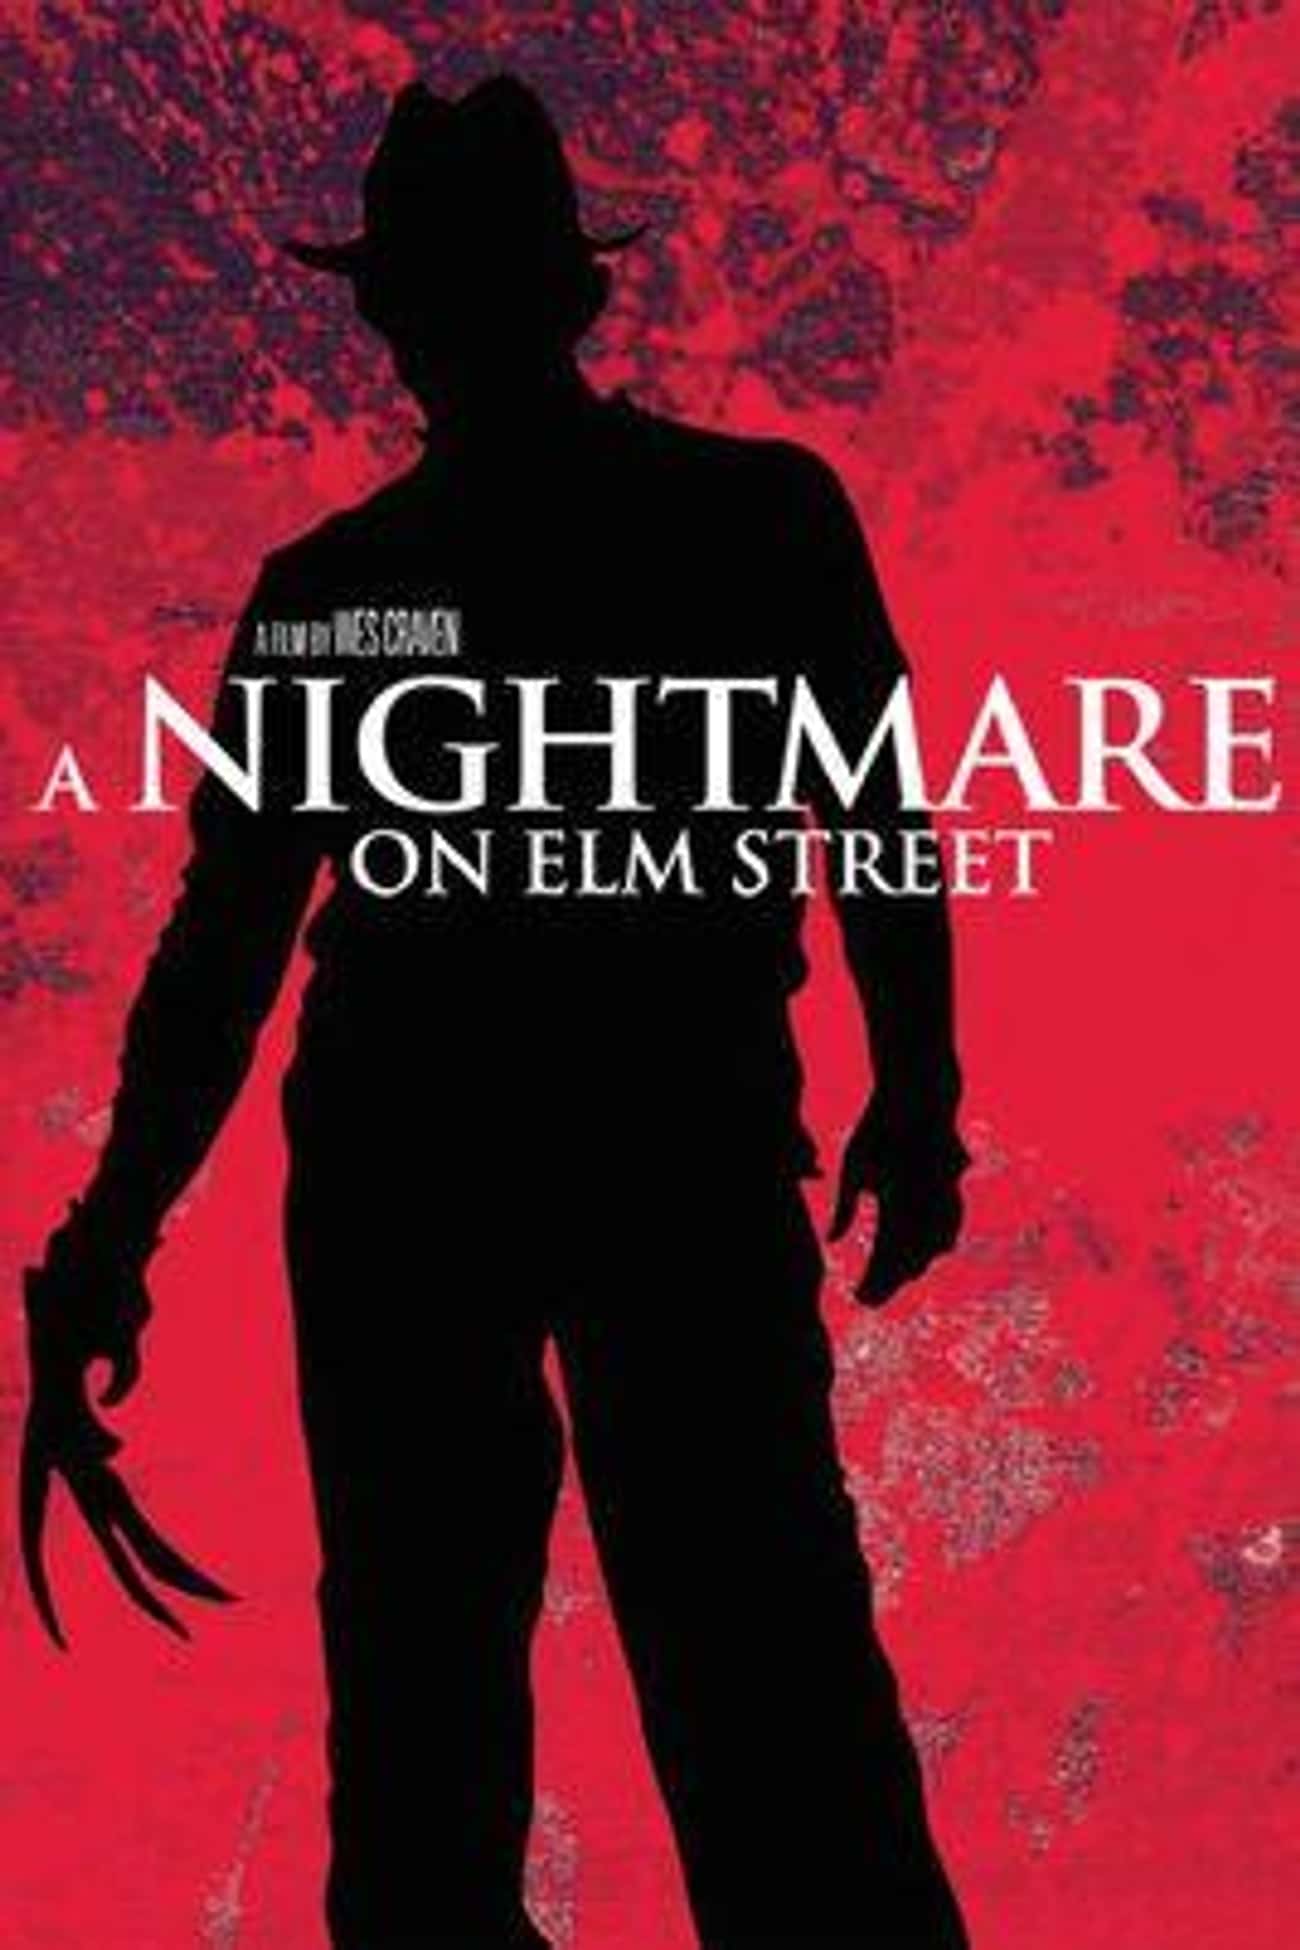 Freddy From &#39;A Nightmare On Elm Street&#39; Steals Children&#39;s Dreams To Gain Power